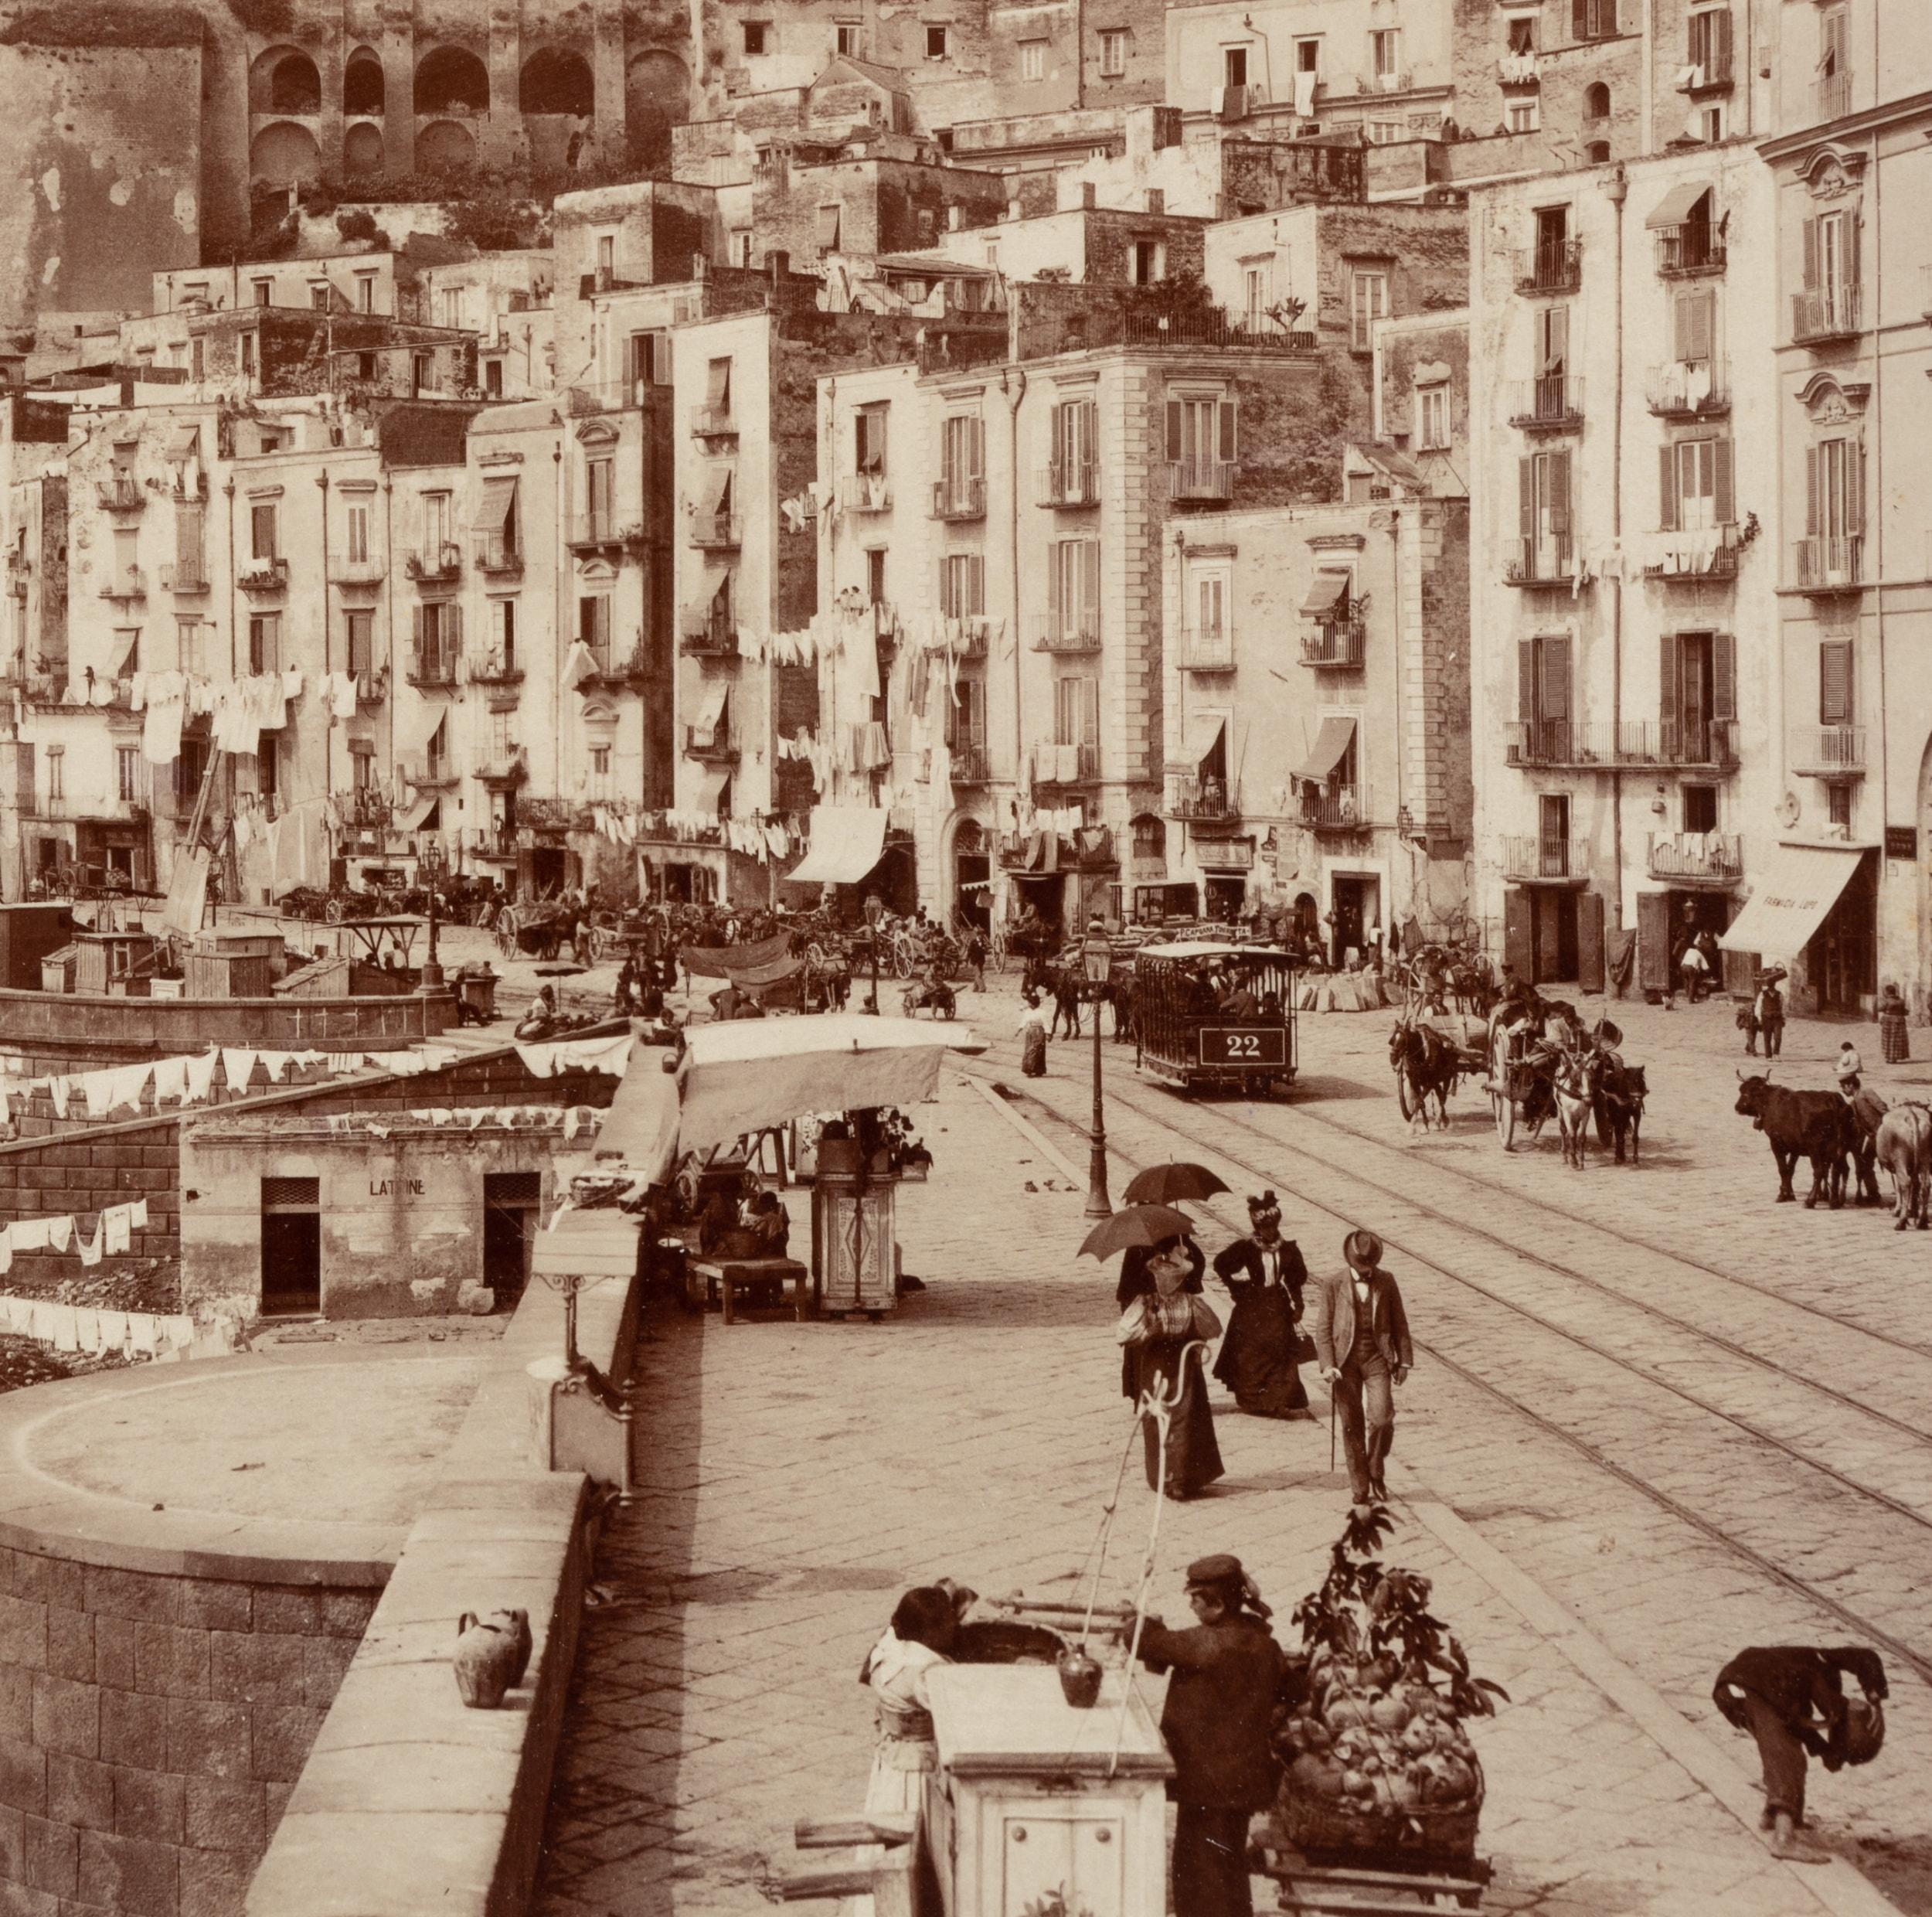 Fratelli Alinari (19th century): Lively street scene with passers-by, carriages and drying laundry on linen Strada di Santa Lucia, today Via Santa Lucia with view of the Pizzofalcone hill, Naples, c. 1880, albumen paper print

Technique: albumen